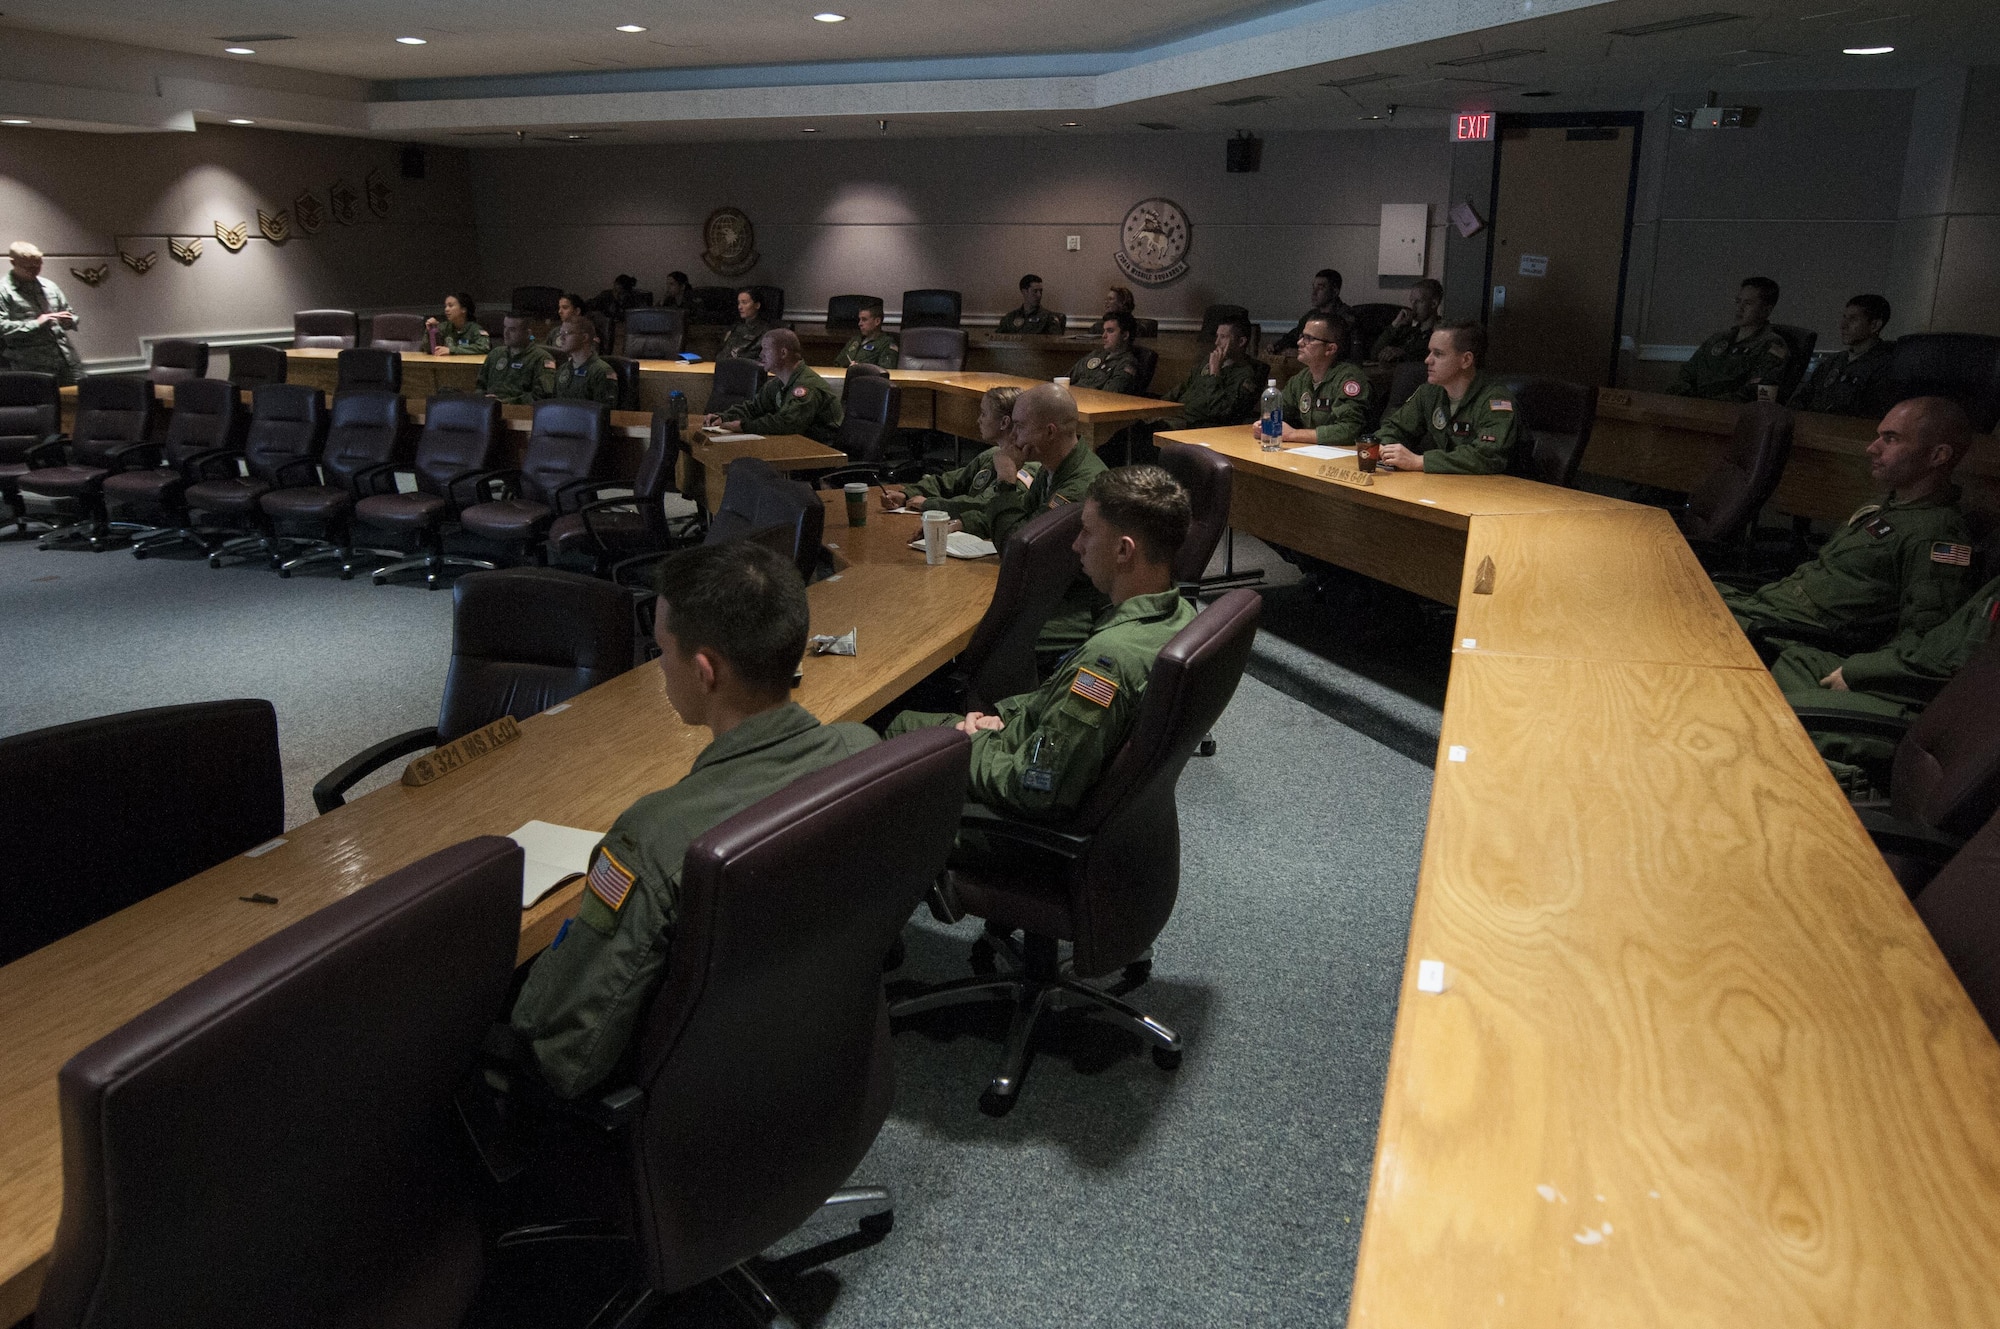 Missileers from the 90th Operations Group attend a pre-departure briefing at F.E. Warren Air Force Base, Wyo., Nov. 5, 2016. The briefing details the conditions of the 90th Missile Wing missile complex including weather forecasts and road conditions for their travel. (U.S. Air Force photo by Staff Sgt. Christopher Ruano)